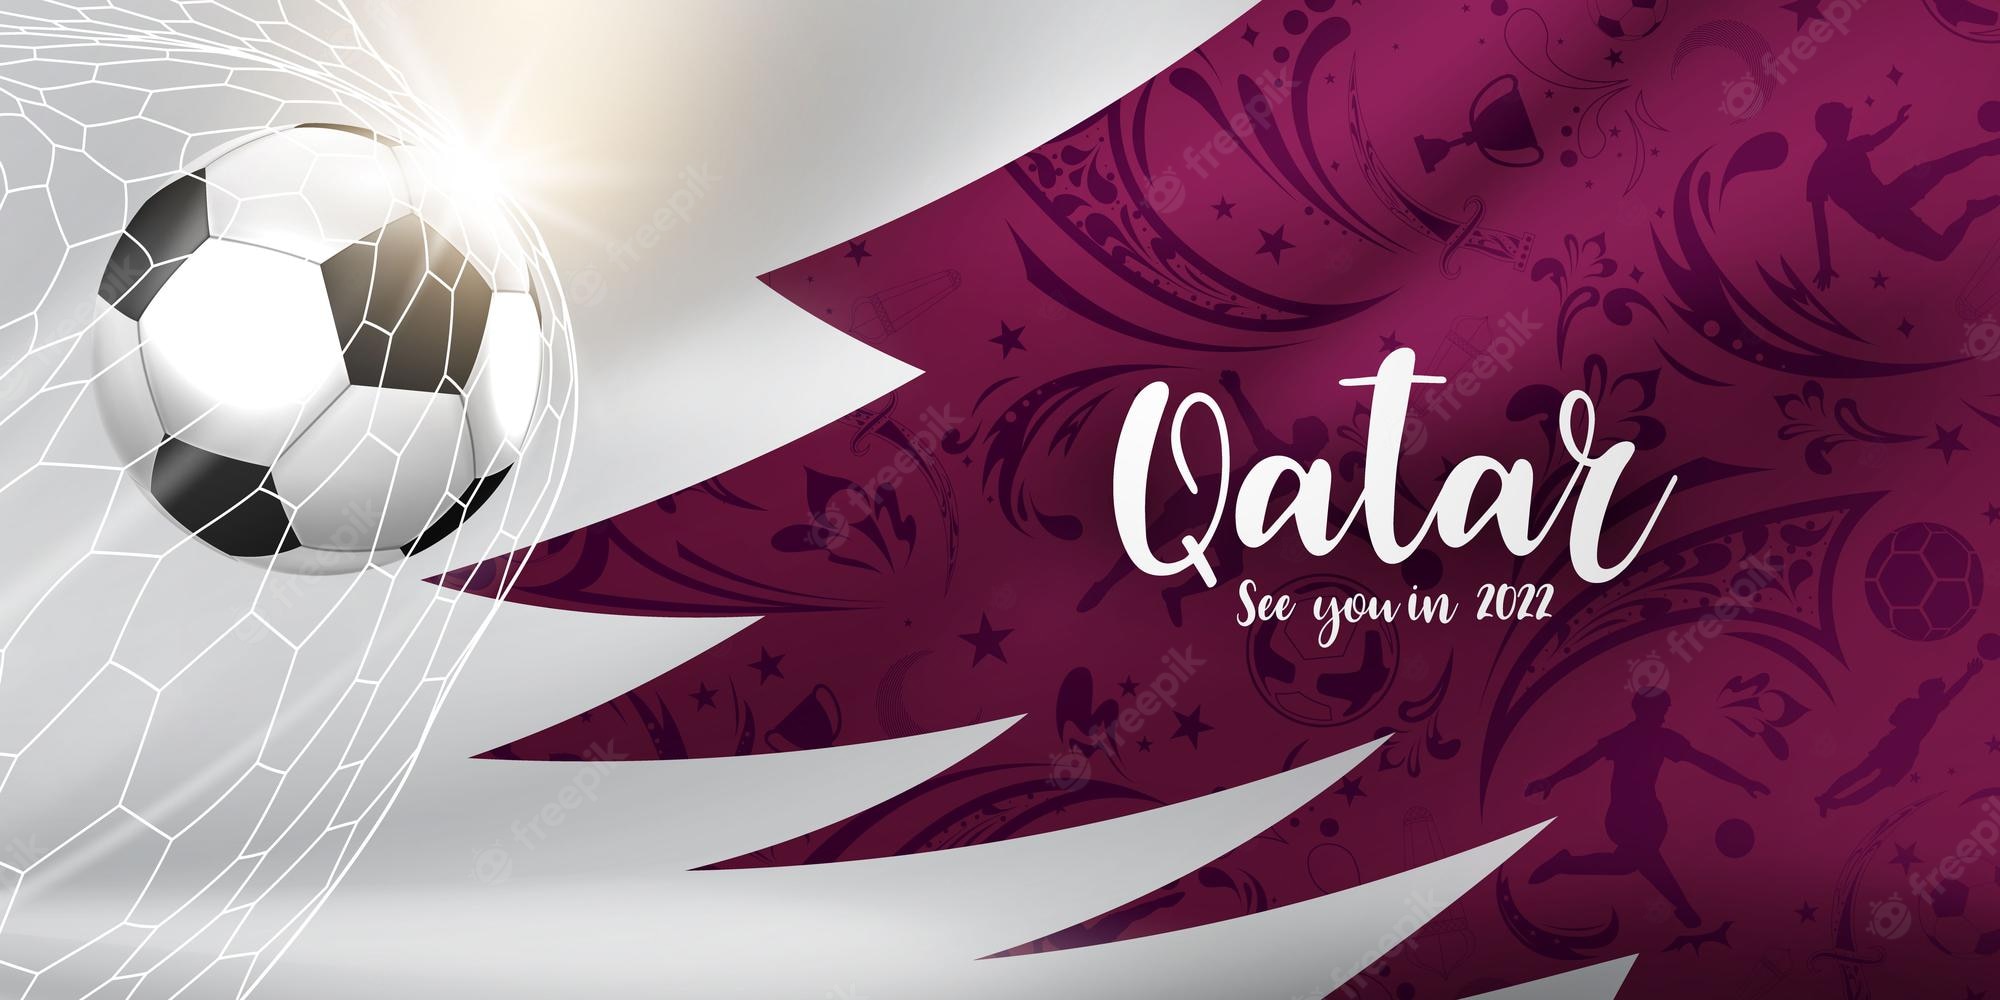 Premium Vector. Football world cup background for banner, soccer championship 2022 in qatar